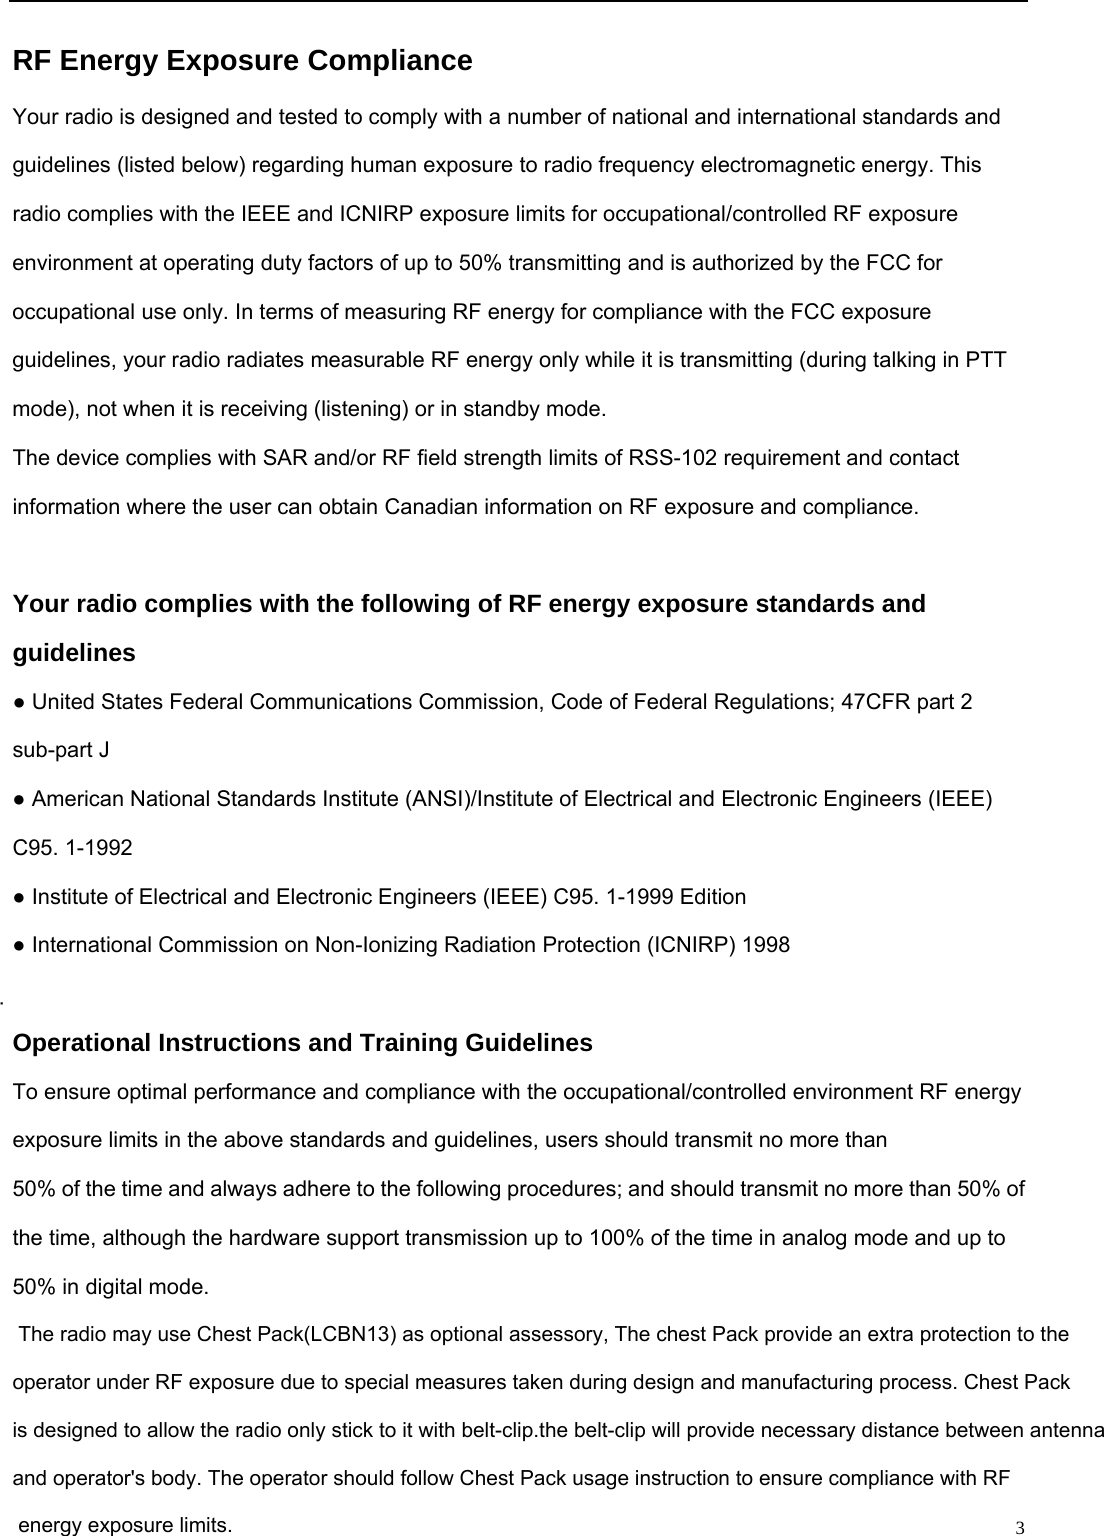                                                                                                              3RF Energy Exposure Compliance Your radio is designed and tested to comply with a number of national and international standards and guidelines (listed below) regarding human exposure to radio frequency electromagnetic energy. This radio complies with the IEEE and ICNIRP exposure limits for occupational/controlled RF exposure environment at operating duty factors of up to 50% transmitting and is authorized by the FCC for occupational use only. In terms of measuring RF energy for compliance with the FCC exposure guidelines, your radio radiates measurable RF energy only while it is transmitting (during talking in PTT mode), not when it is receiving (listening) or in standby mode. The device complies with SAR and/or RF field strength limits of RSS-102 requirement and contact information where the user can obtain Canadian information on RF exposure and compliance.  Your radio complies with the following of RF energy exposure standards and guidelines ● United States Federal Communications Commission, Code of Federal Regulations; 47CFR part 2 sub-part J ● American National Standards Institute (ANSI)/Institute of Electrical and Electronic Engineers (IEEE) C95. 1-1992 ● Institute of Electrical and Electronic Engineers (IEEE) C95. 1-1999 Edition ● International Commission on Non-Ionizing Radiation Protection (ICNIRP) 1998  Operational Instructions and Training Guidelines To ensure optimal performance and compliance with the occupational/controlled environment RF energy exposure limits in the above standards and guidelines, users should transmit no more than 50% of the time and always adhere to the following procedures; and should transmit no more than 50% of the time, although the hardware support transmission up to 100% of the time in analog mode and up to 50% in digital mode.  The radio may use Chest Pack(LCBN13) as optional assessory, The chest Pack provide an extra protection to the operator under RF exposure due to special measures taken during design and manufacturing process. Chest Packis designed to allow the radio only stick to it with belt-clip.the belt-clip will provide necessary distance between antenna and operator&apos;s body. The operator should follow Chest Pack usage instruction to ensure compliance with RF energy exposure limits.   